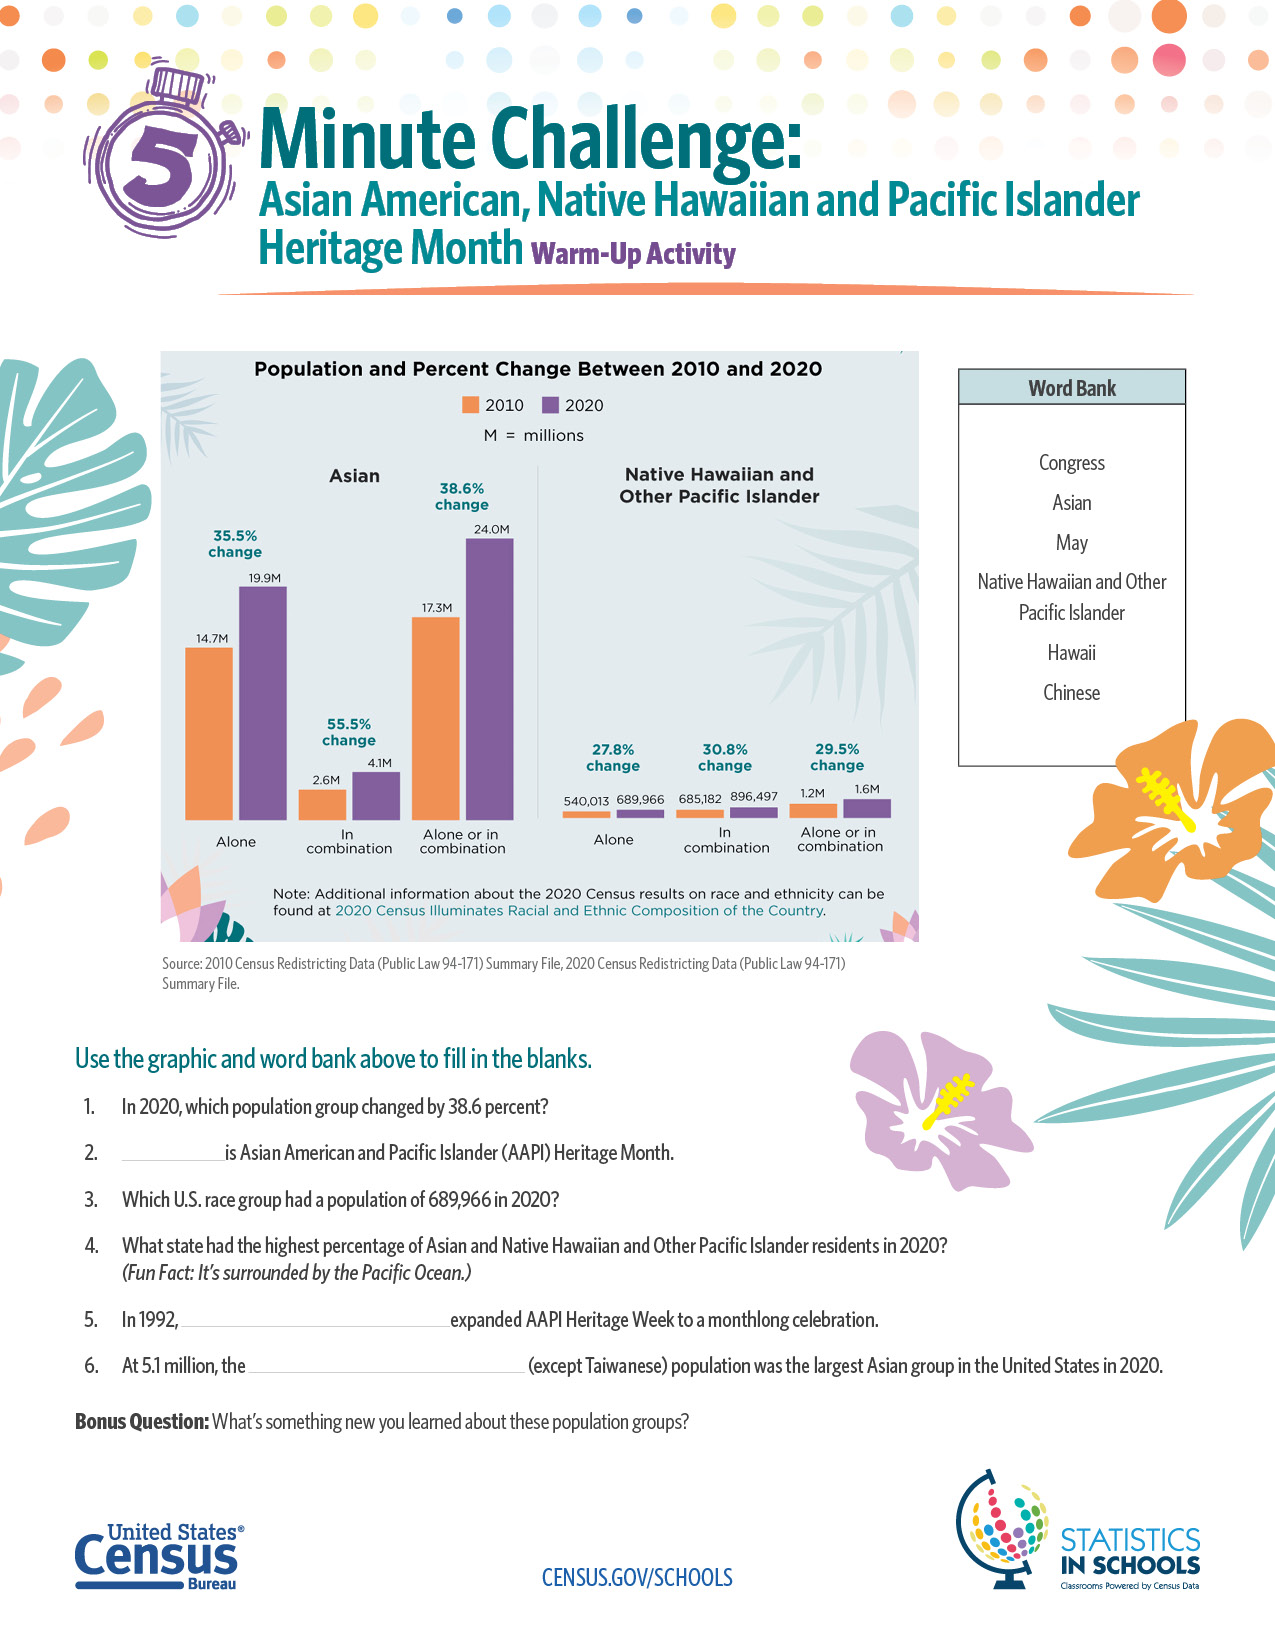 Learn Facts About Asian American, Native Hawaiian and Pacific Islander Heritage Month Warm-Up 